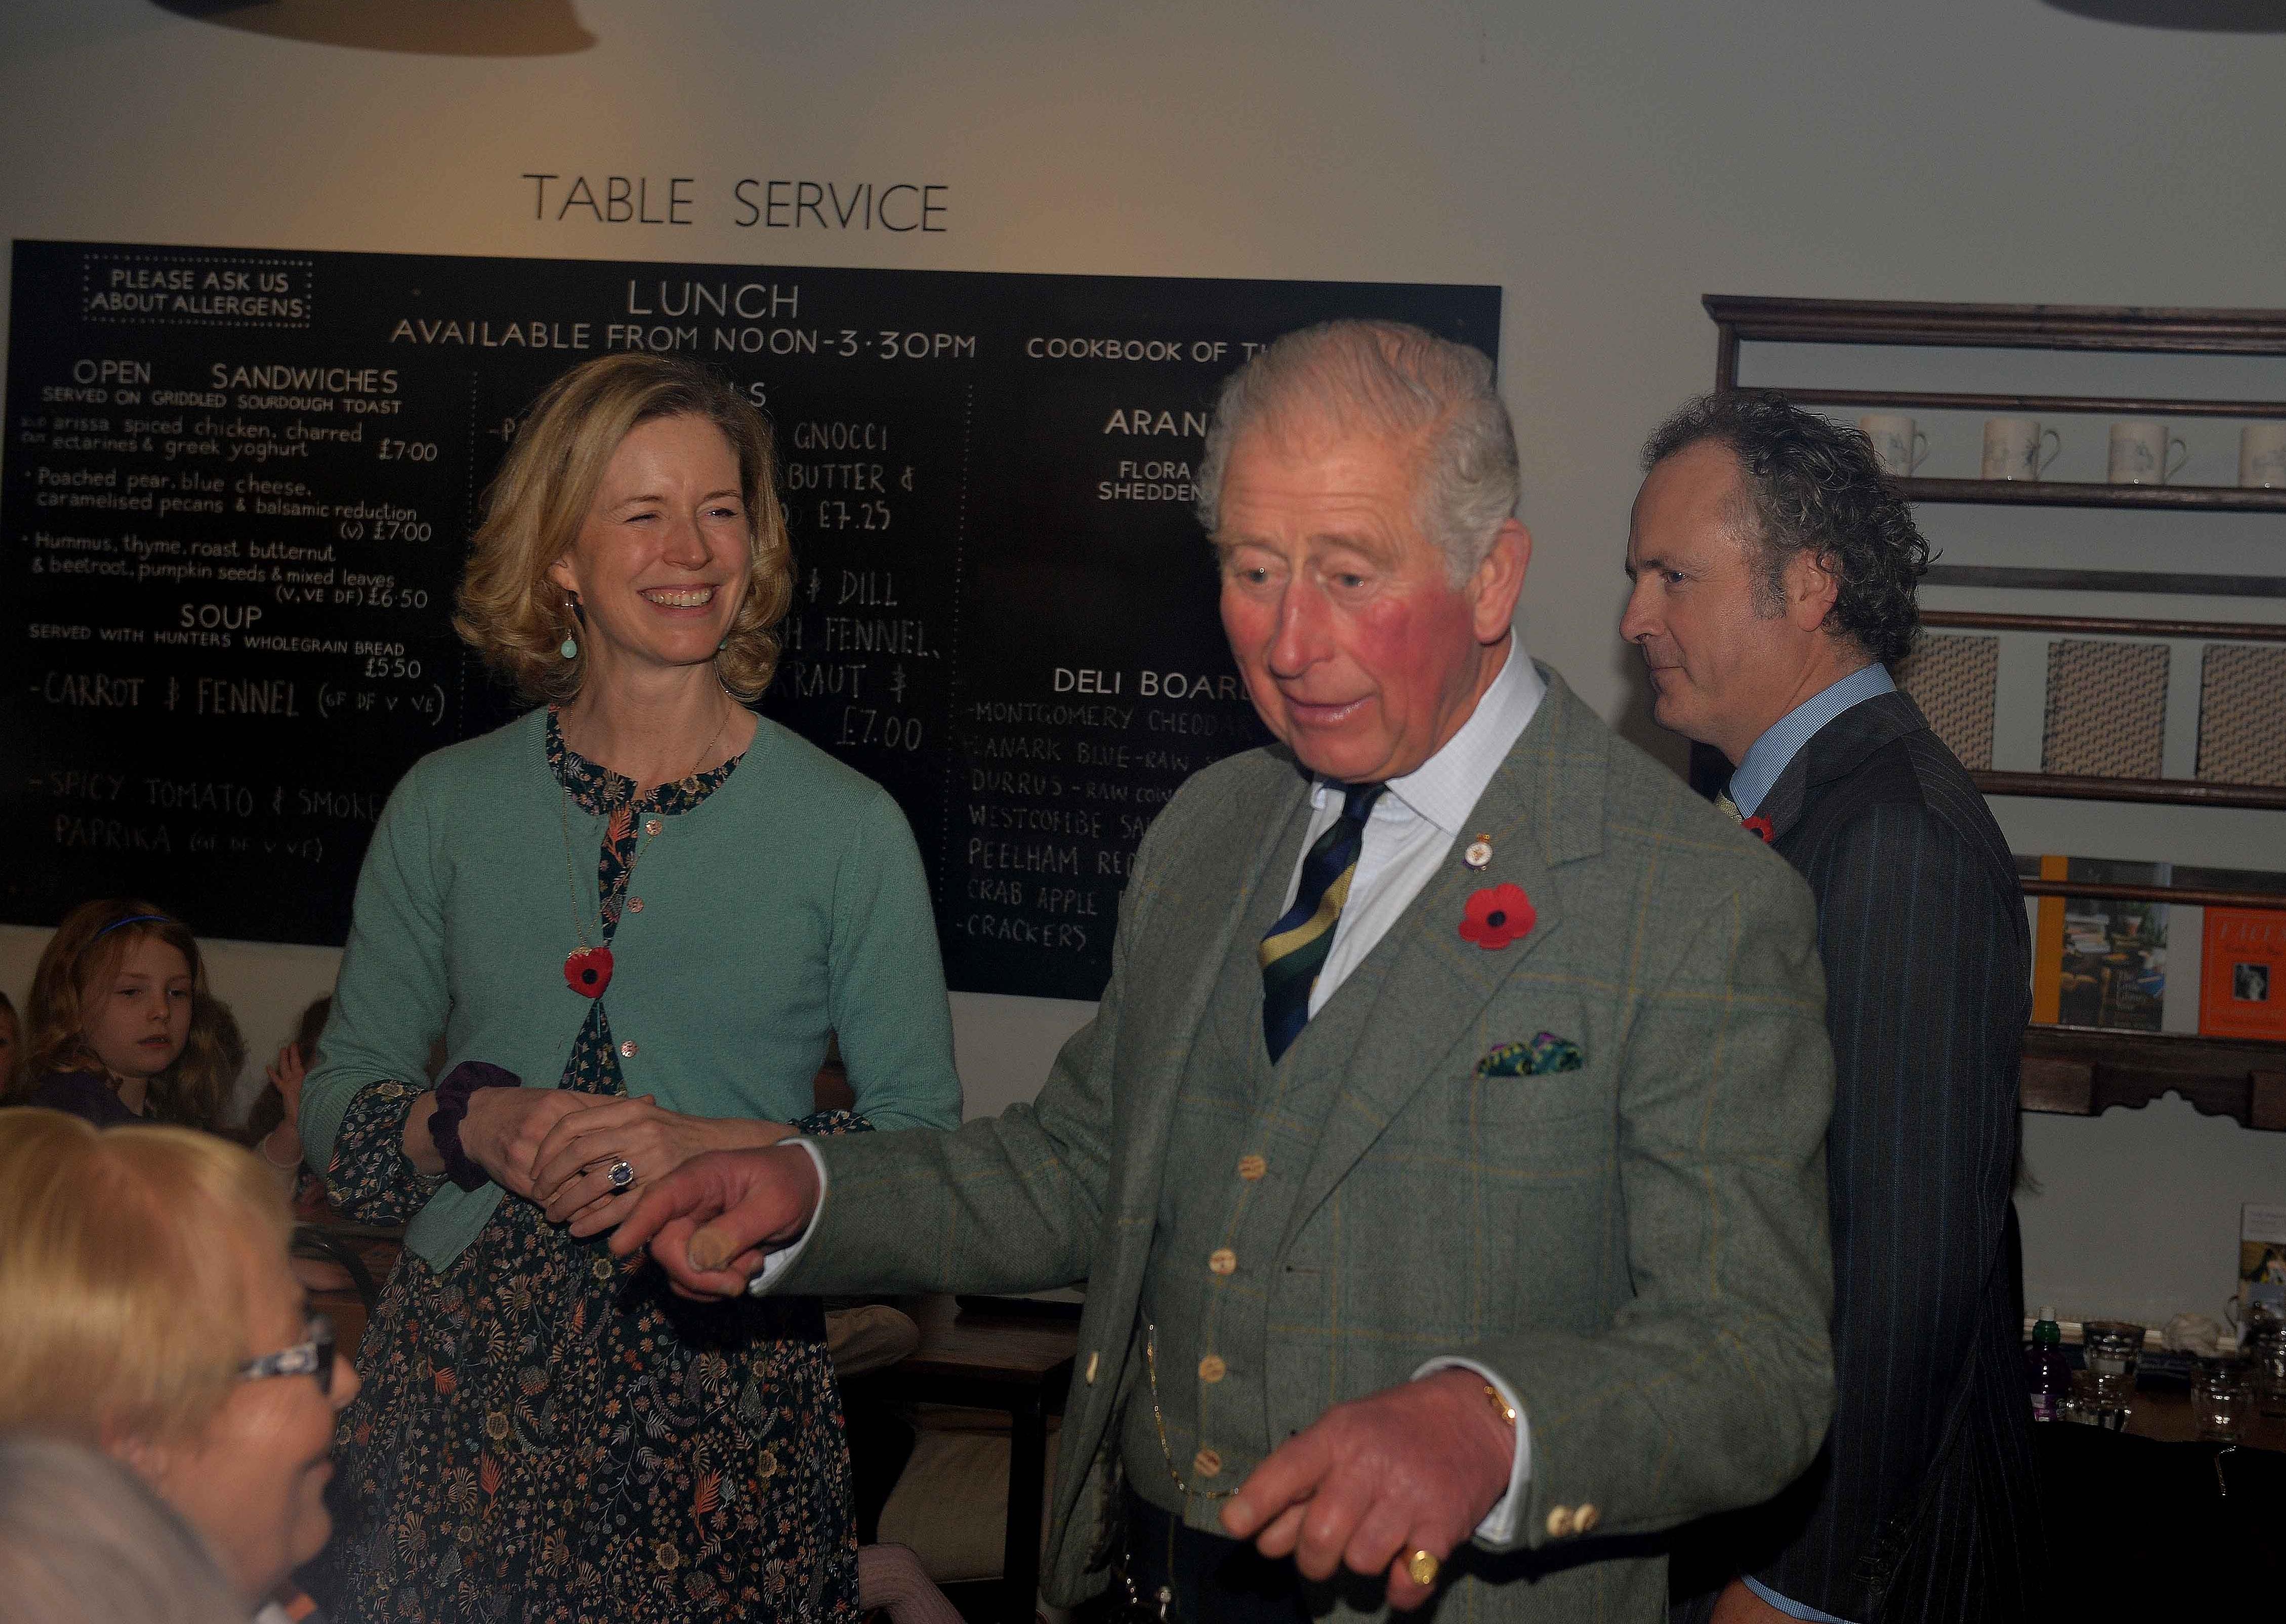 The Duke of Rothesay speaks with diners in the cafe.